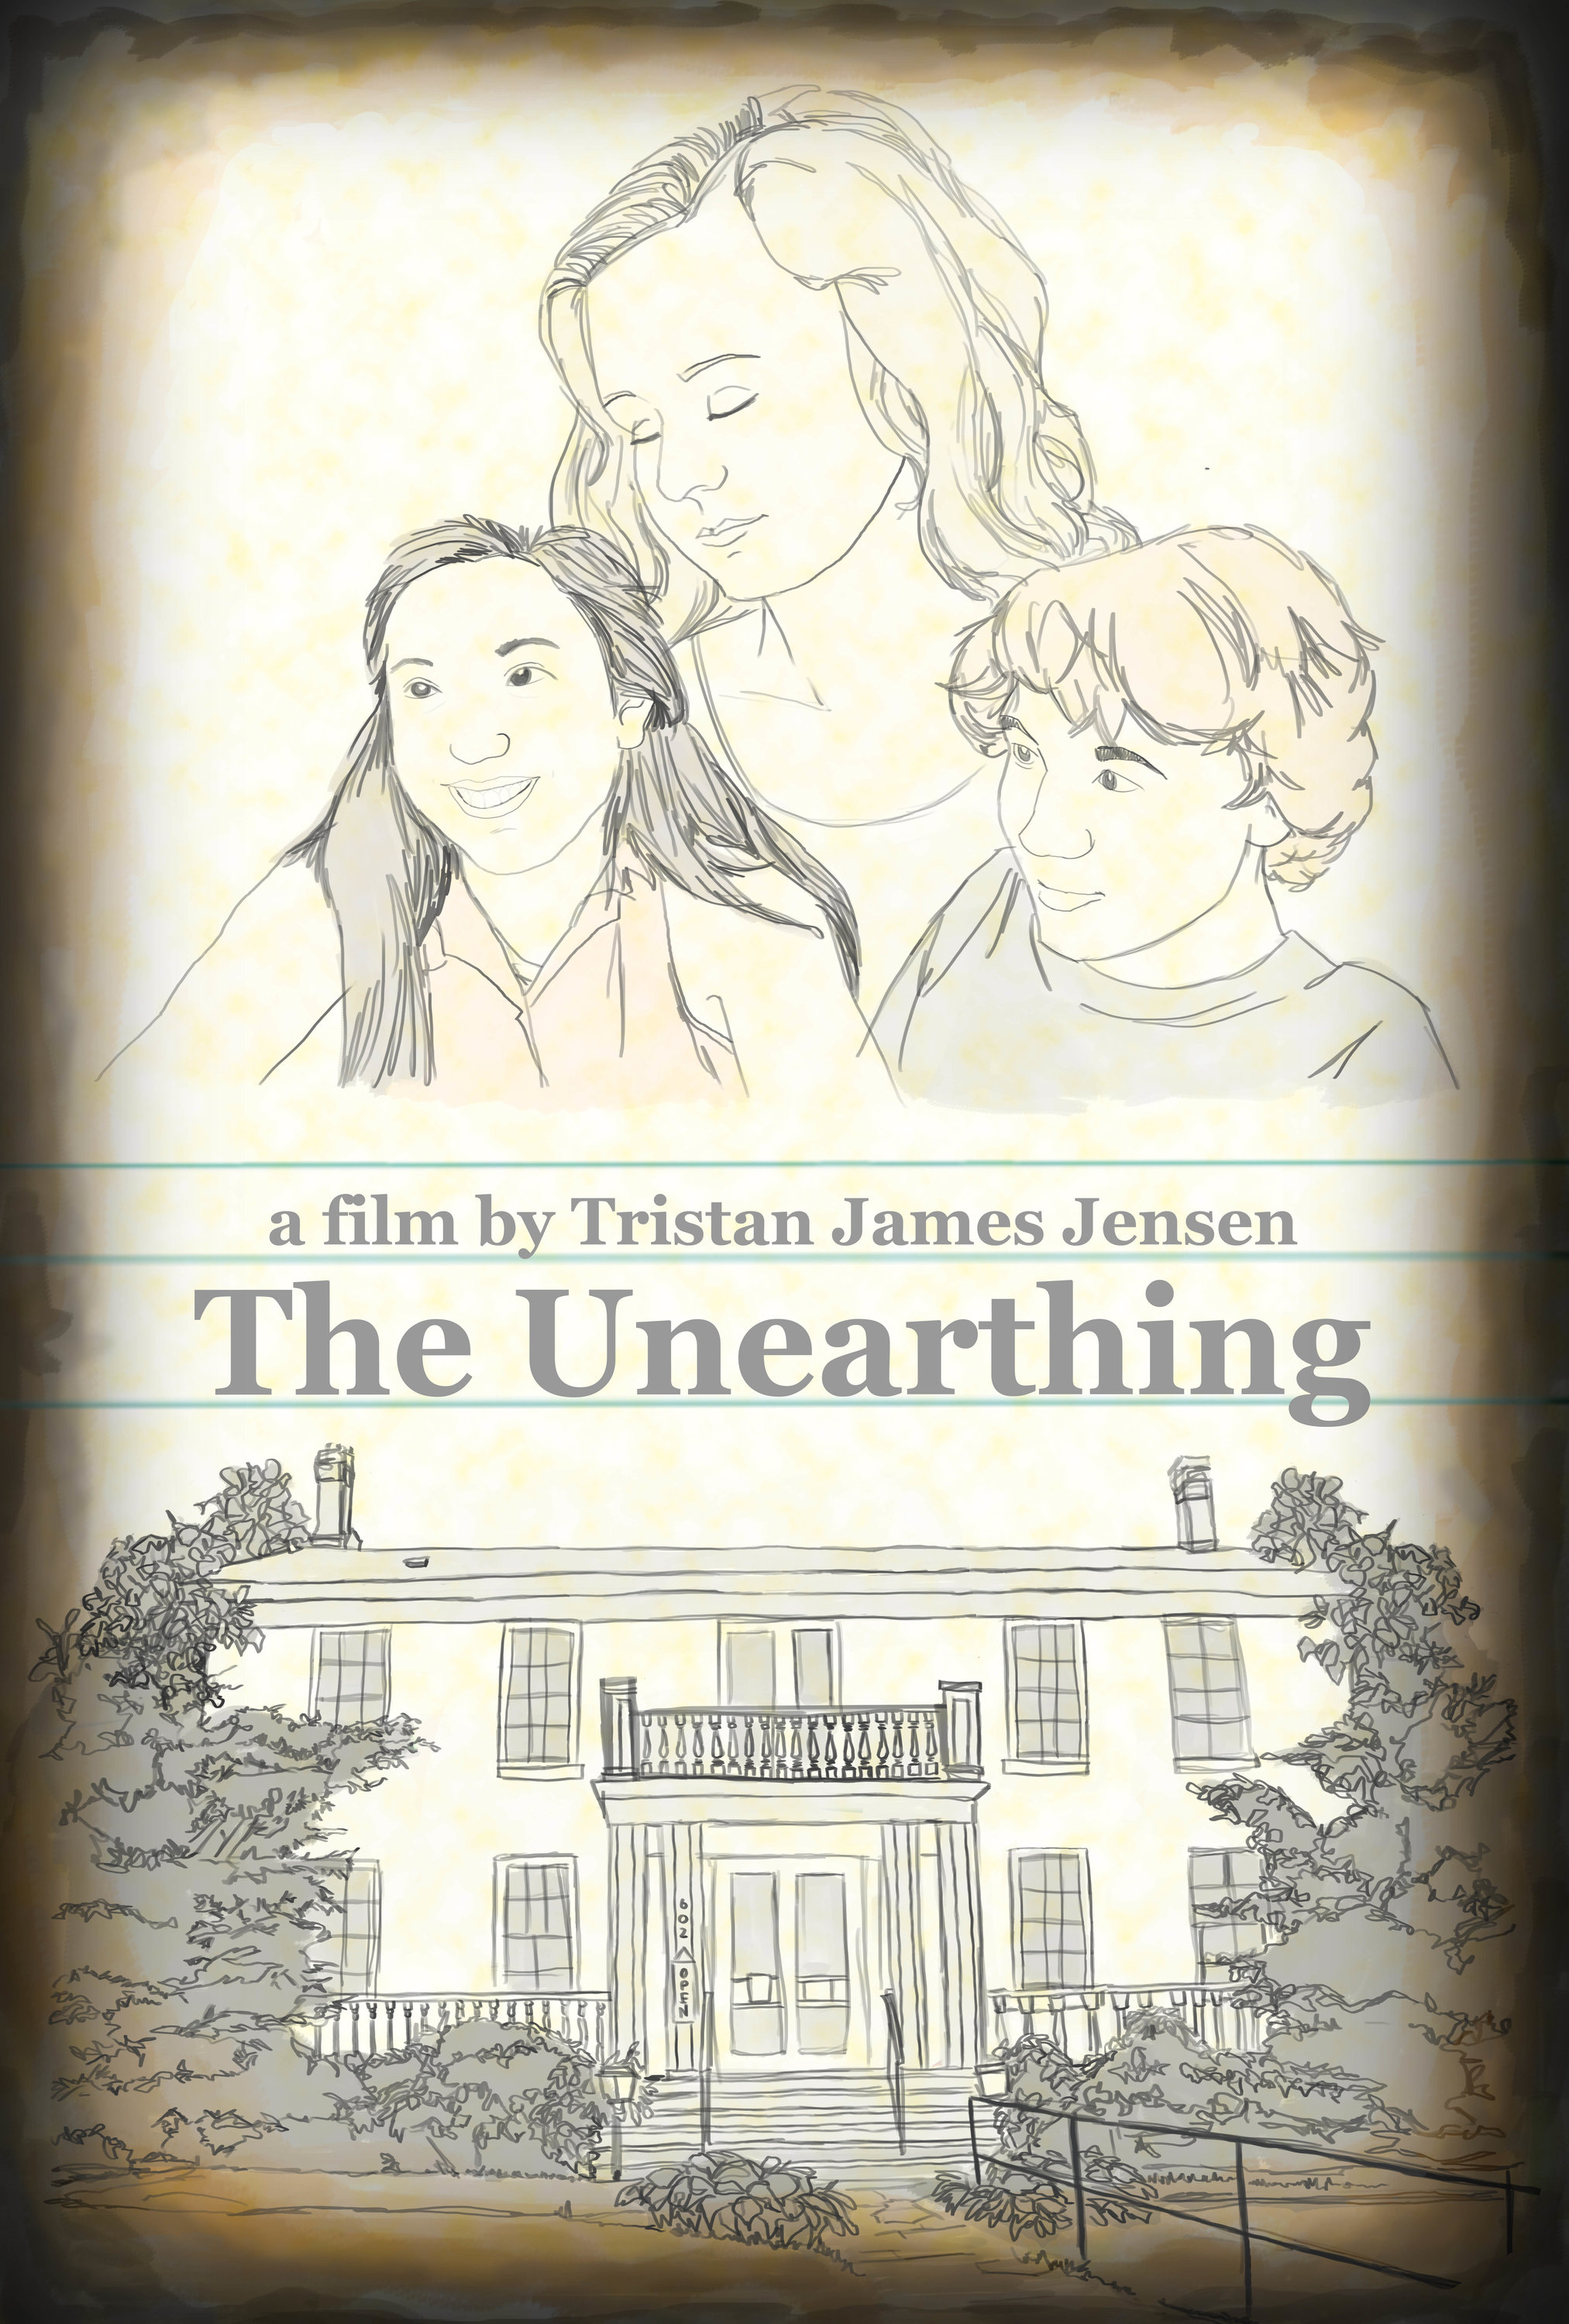 Riley Yeary, Kaleb Miller and Angelina Masciopinto in The Unearthing (2015)